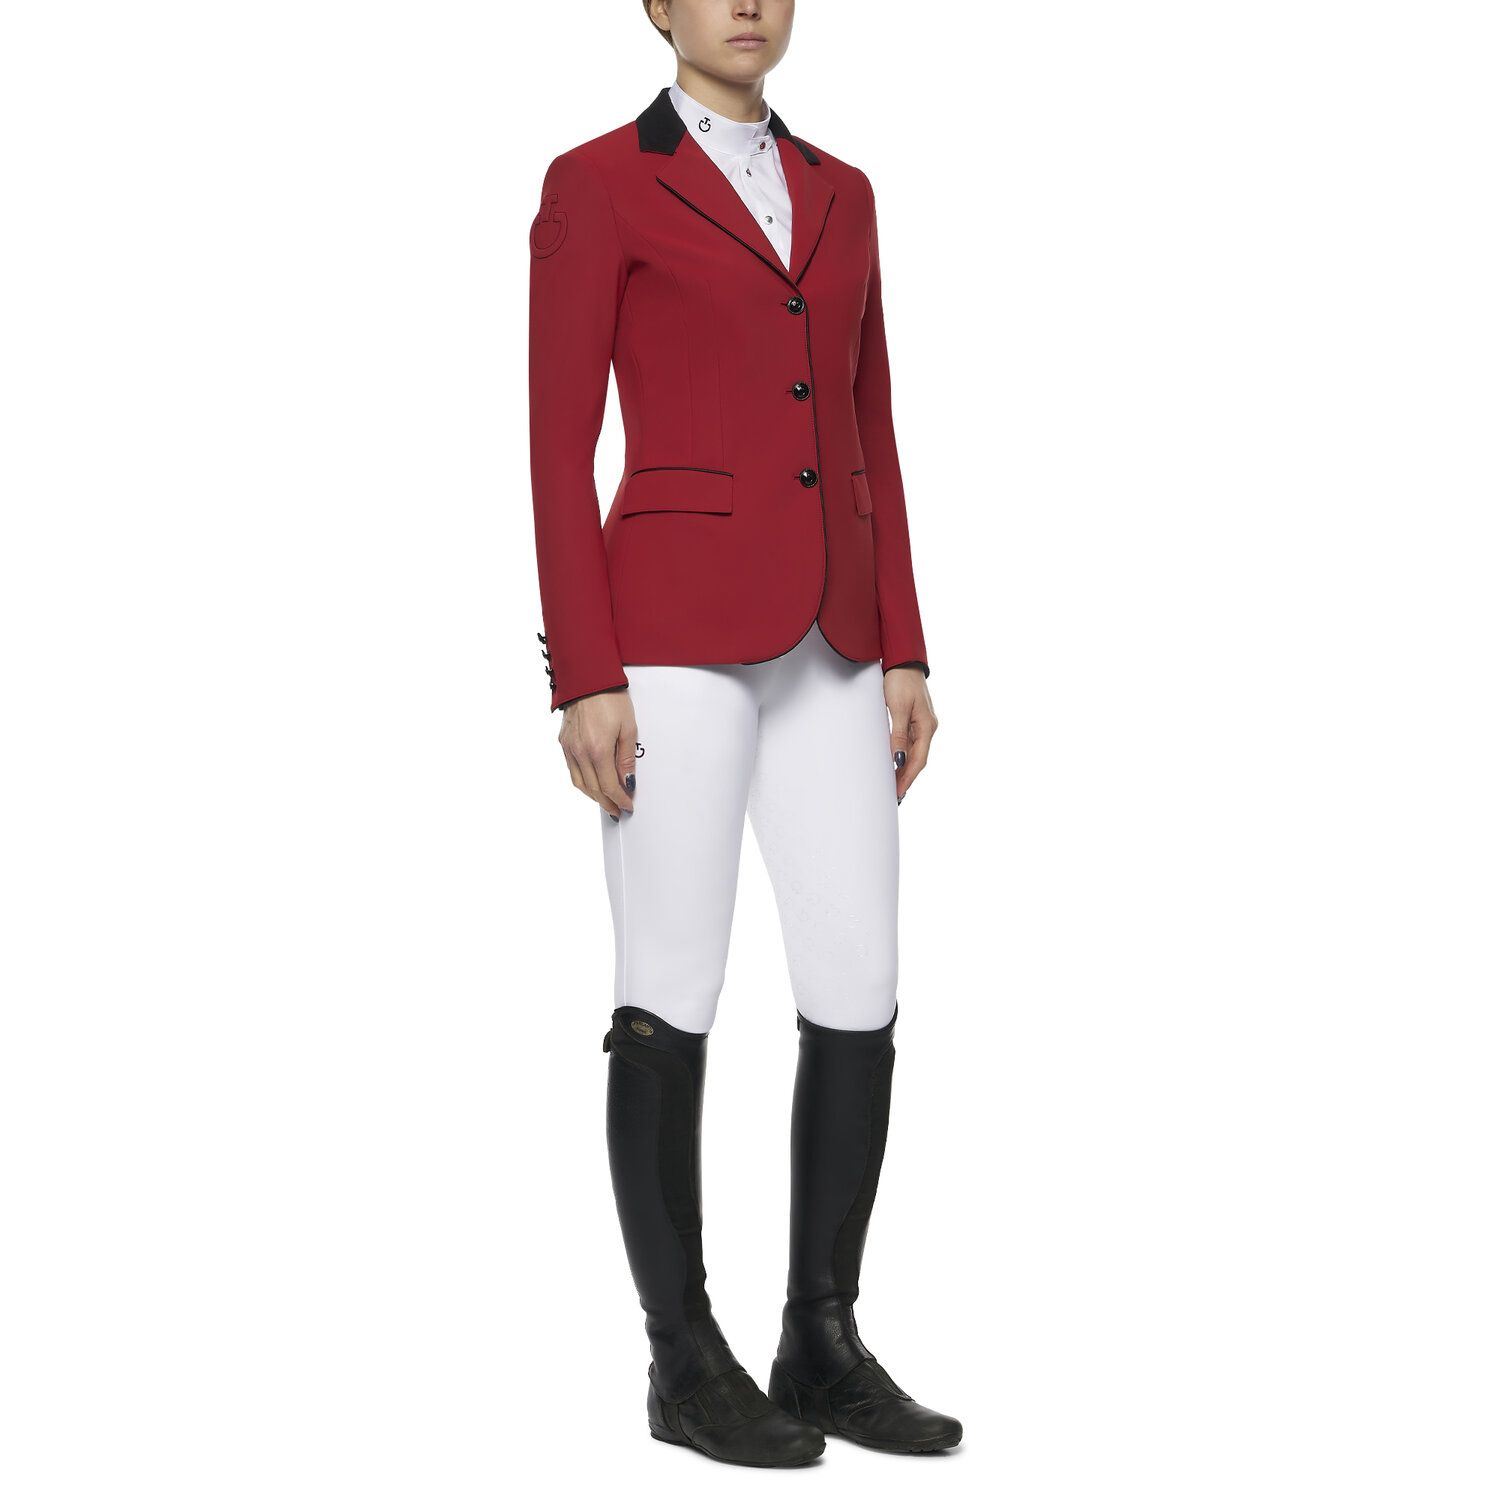 Cavalleria Toscana Women's competition riding jacket. RED-2